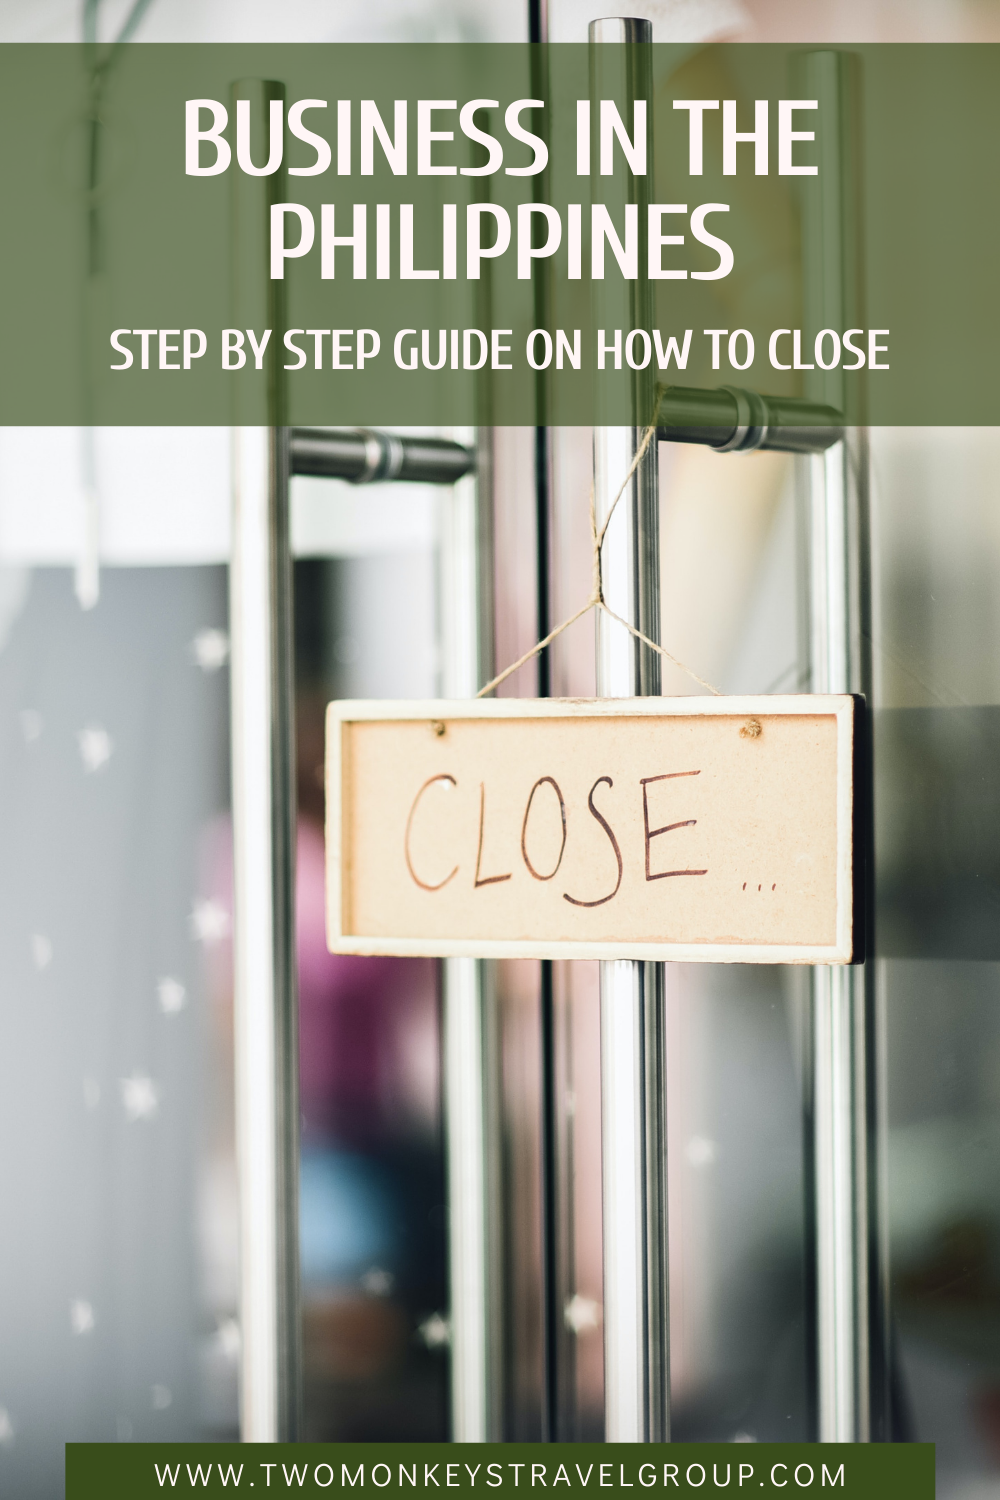 Step by Step Guide on How to Close a Business in the Philippines